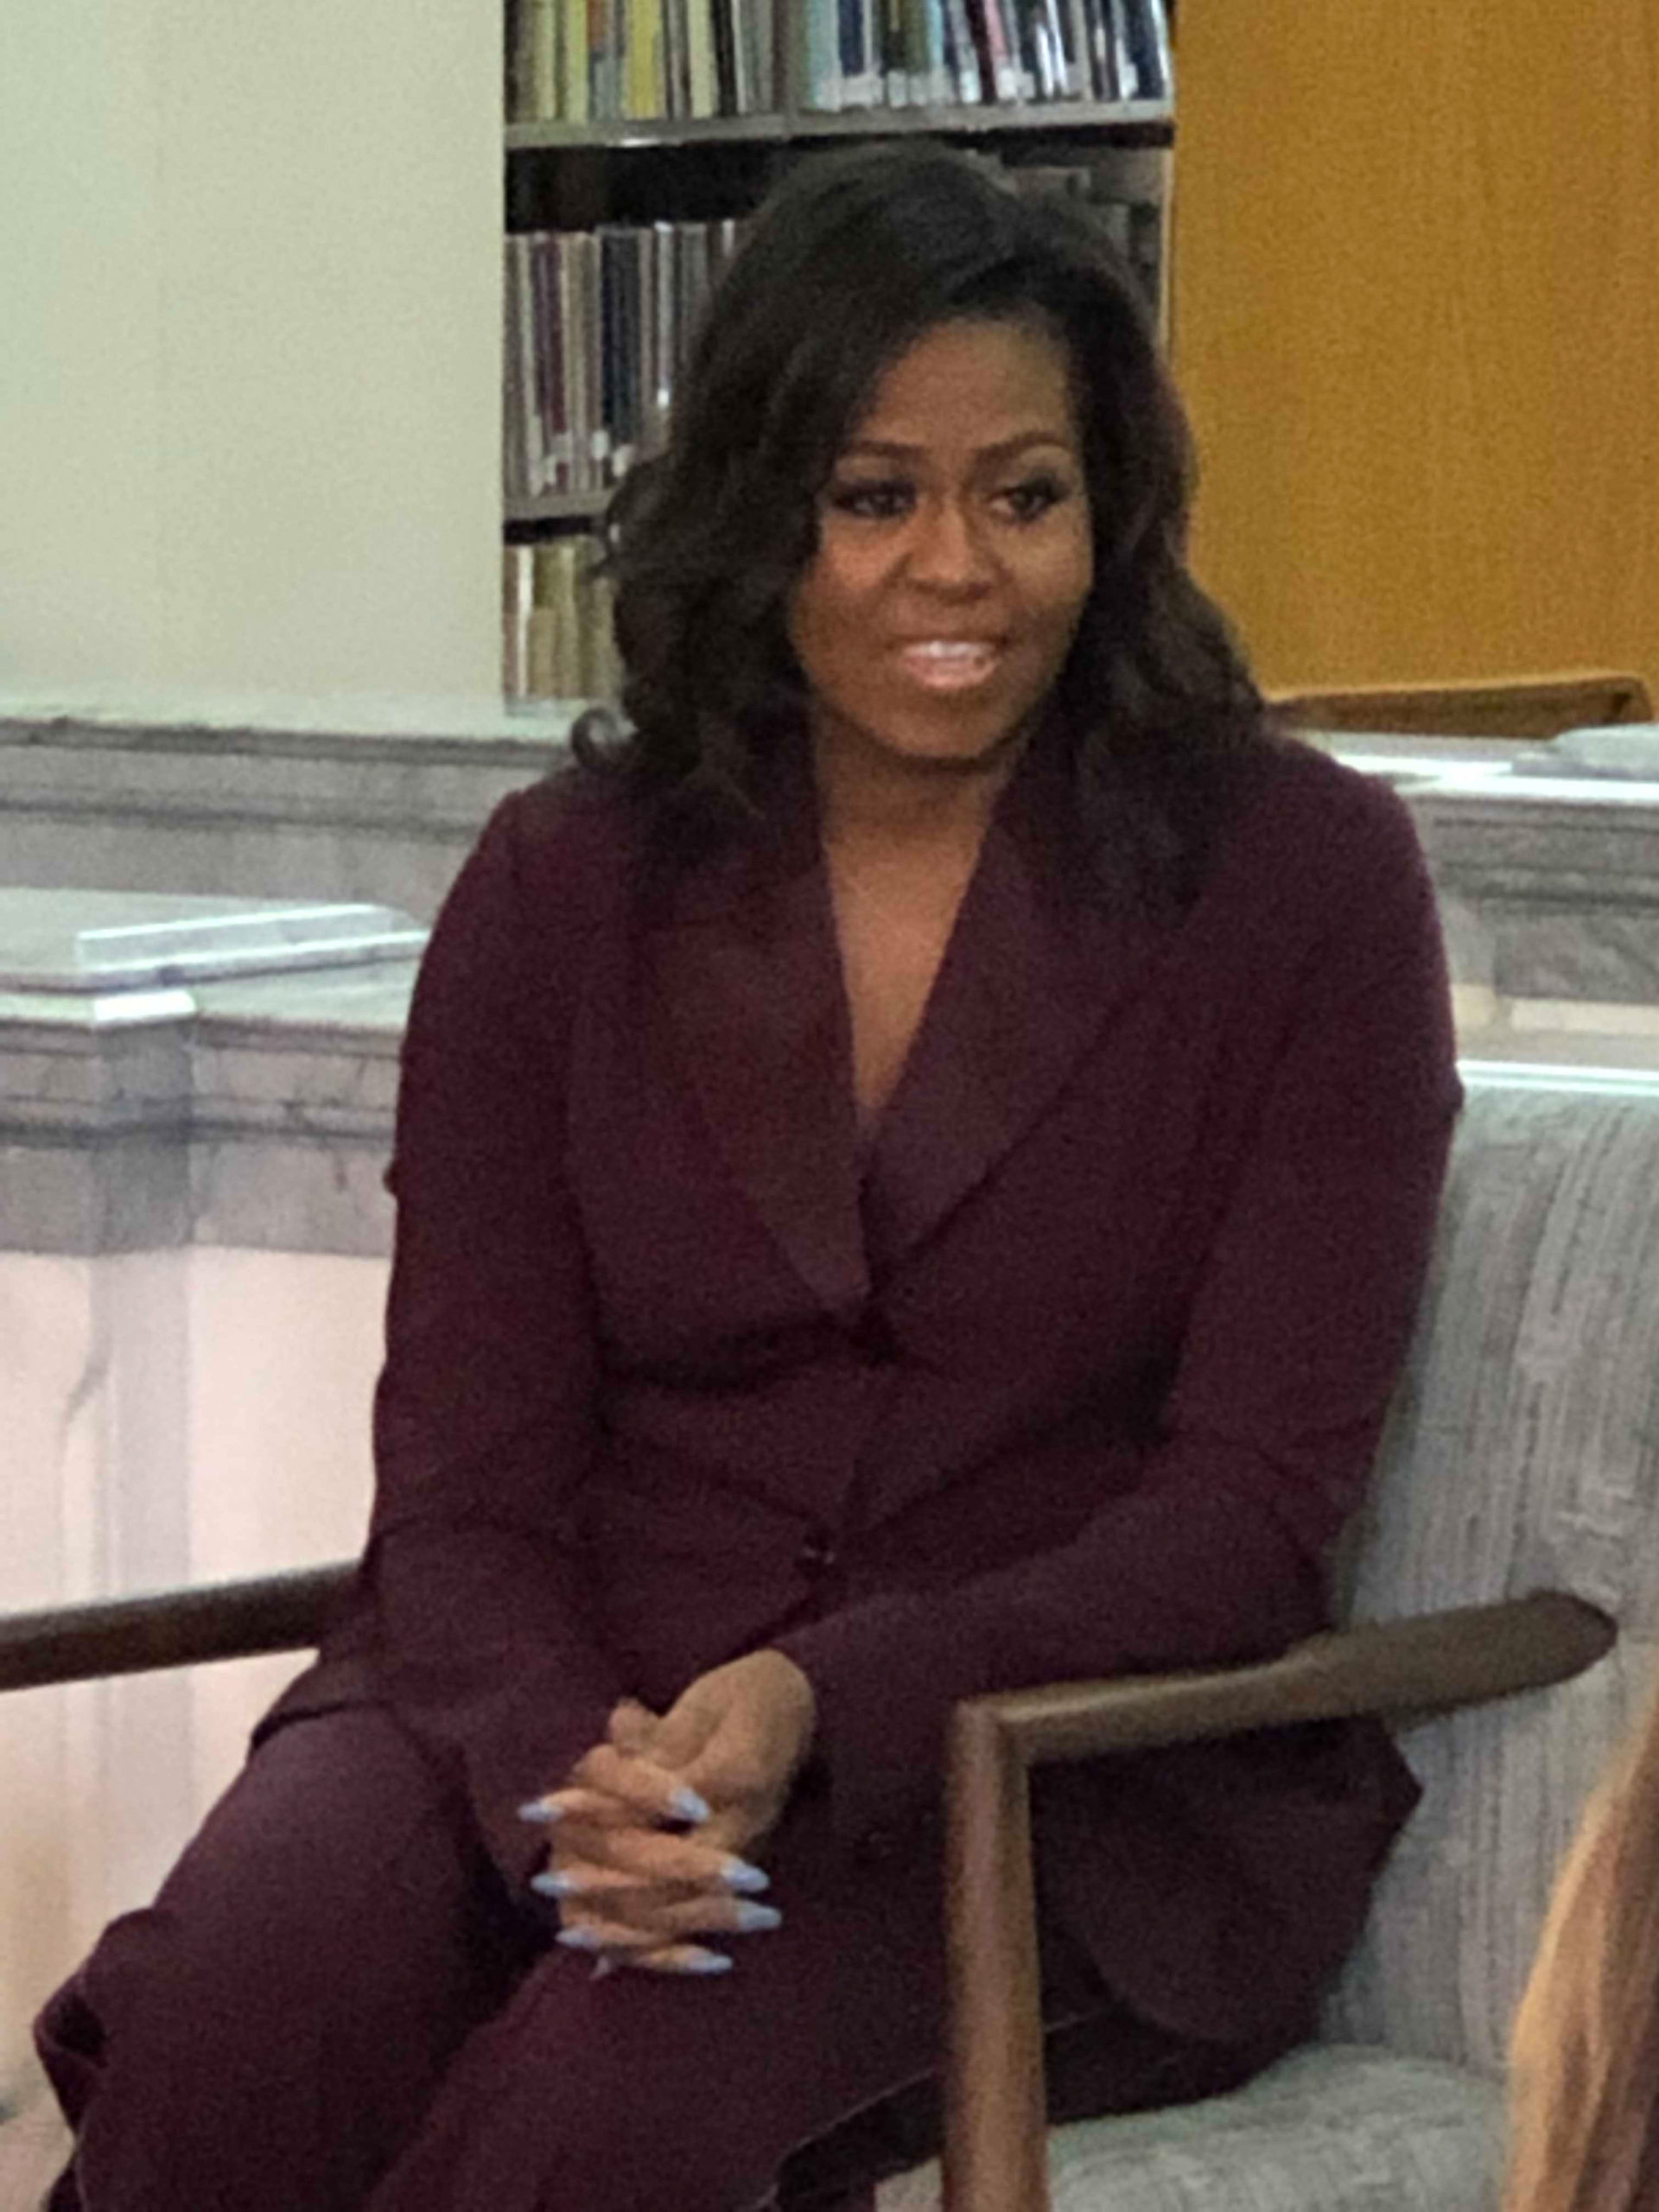 Former FLOTUS, Michelle Obama in an informal setting at Tacoma Public Library's Northwest Room.  Photo: Morf Morford